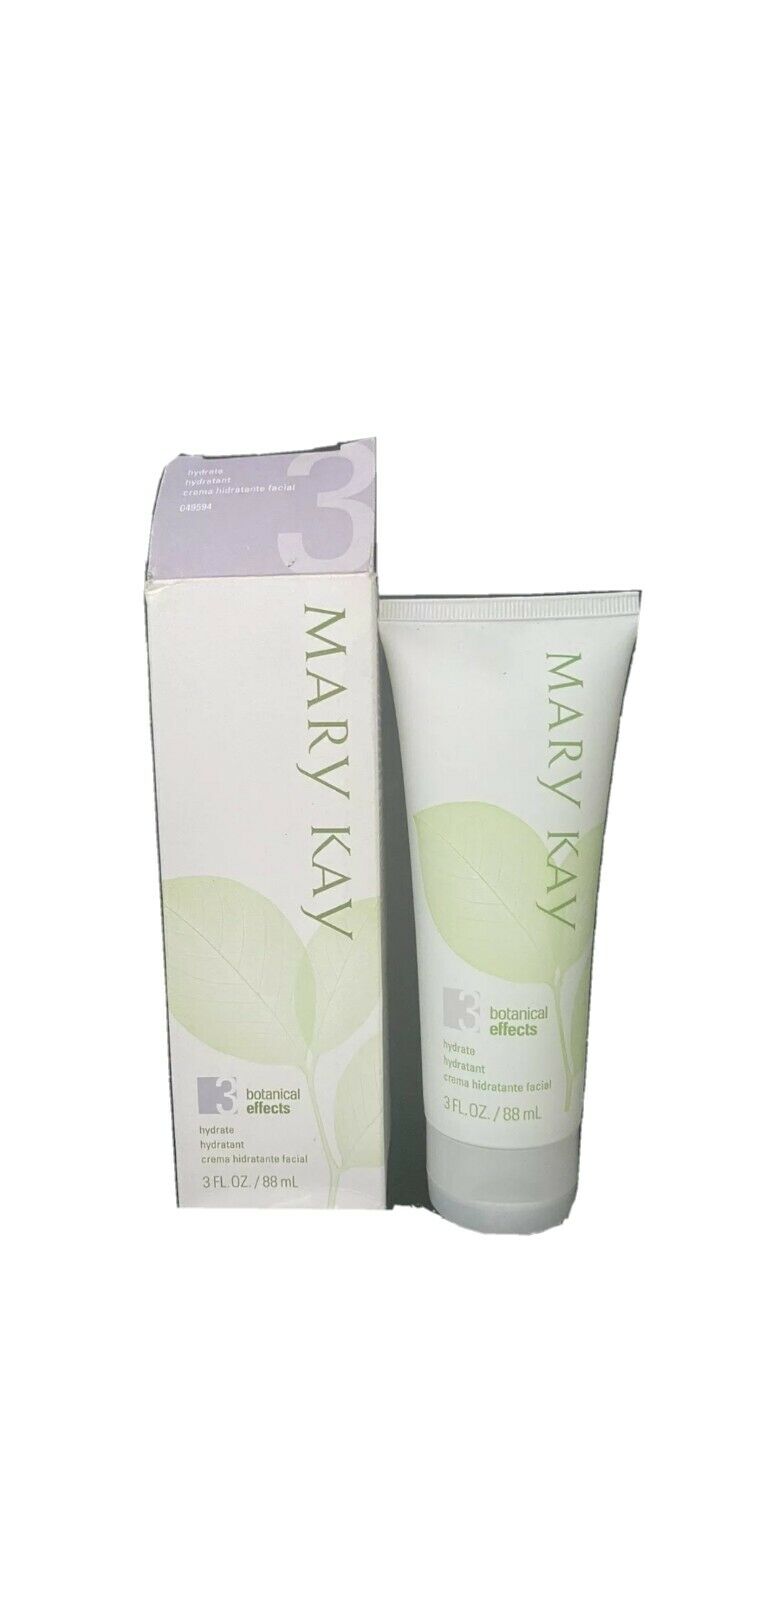 Mary Kay Botanical Effects Mask FORMULA 3-(Oily Skin) DISCONTINUED New in Box